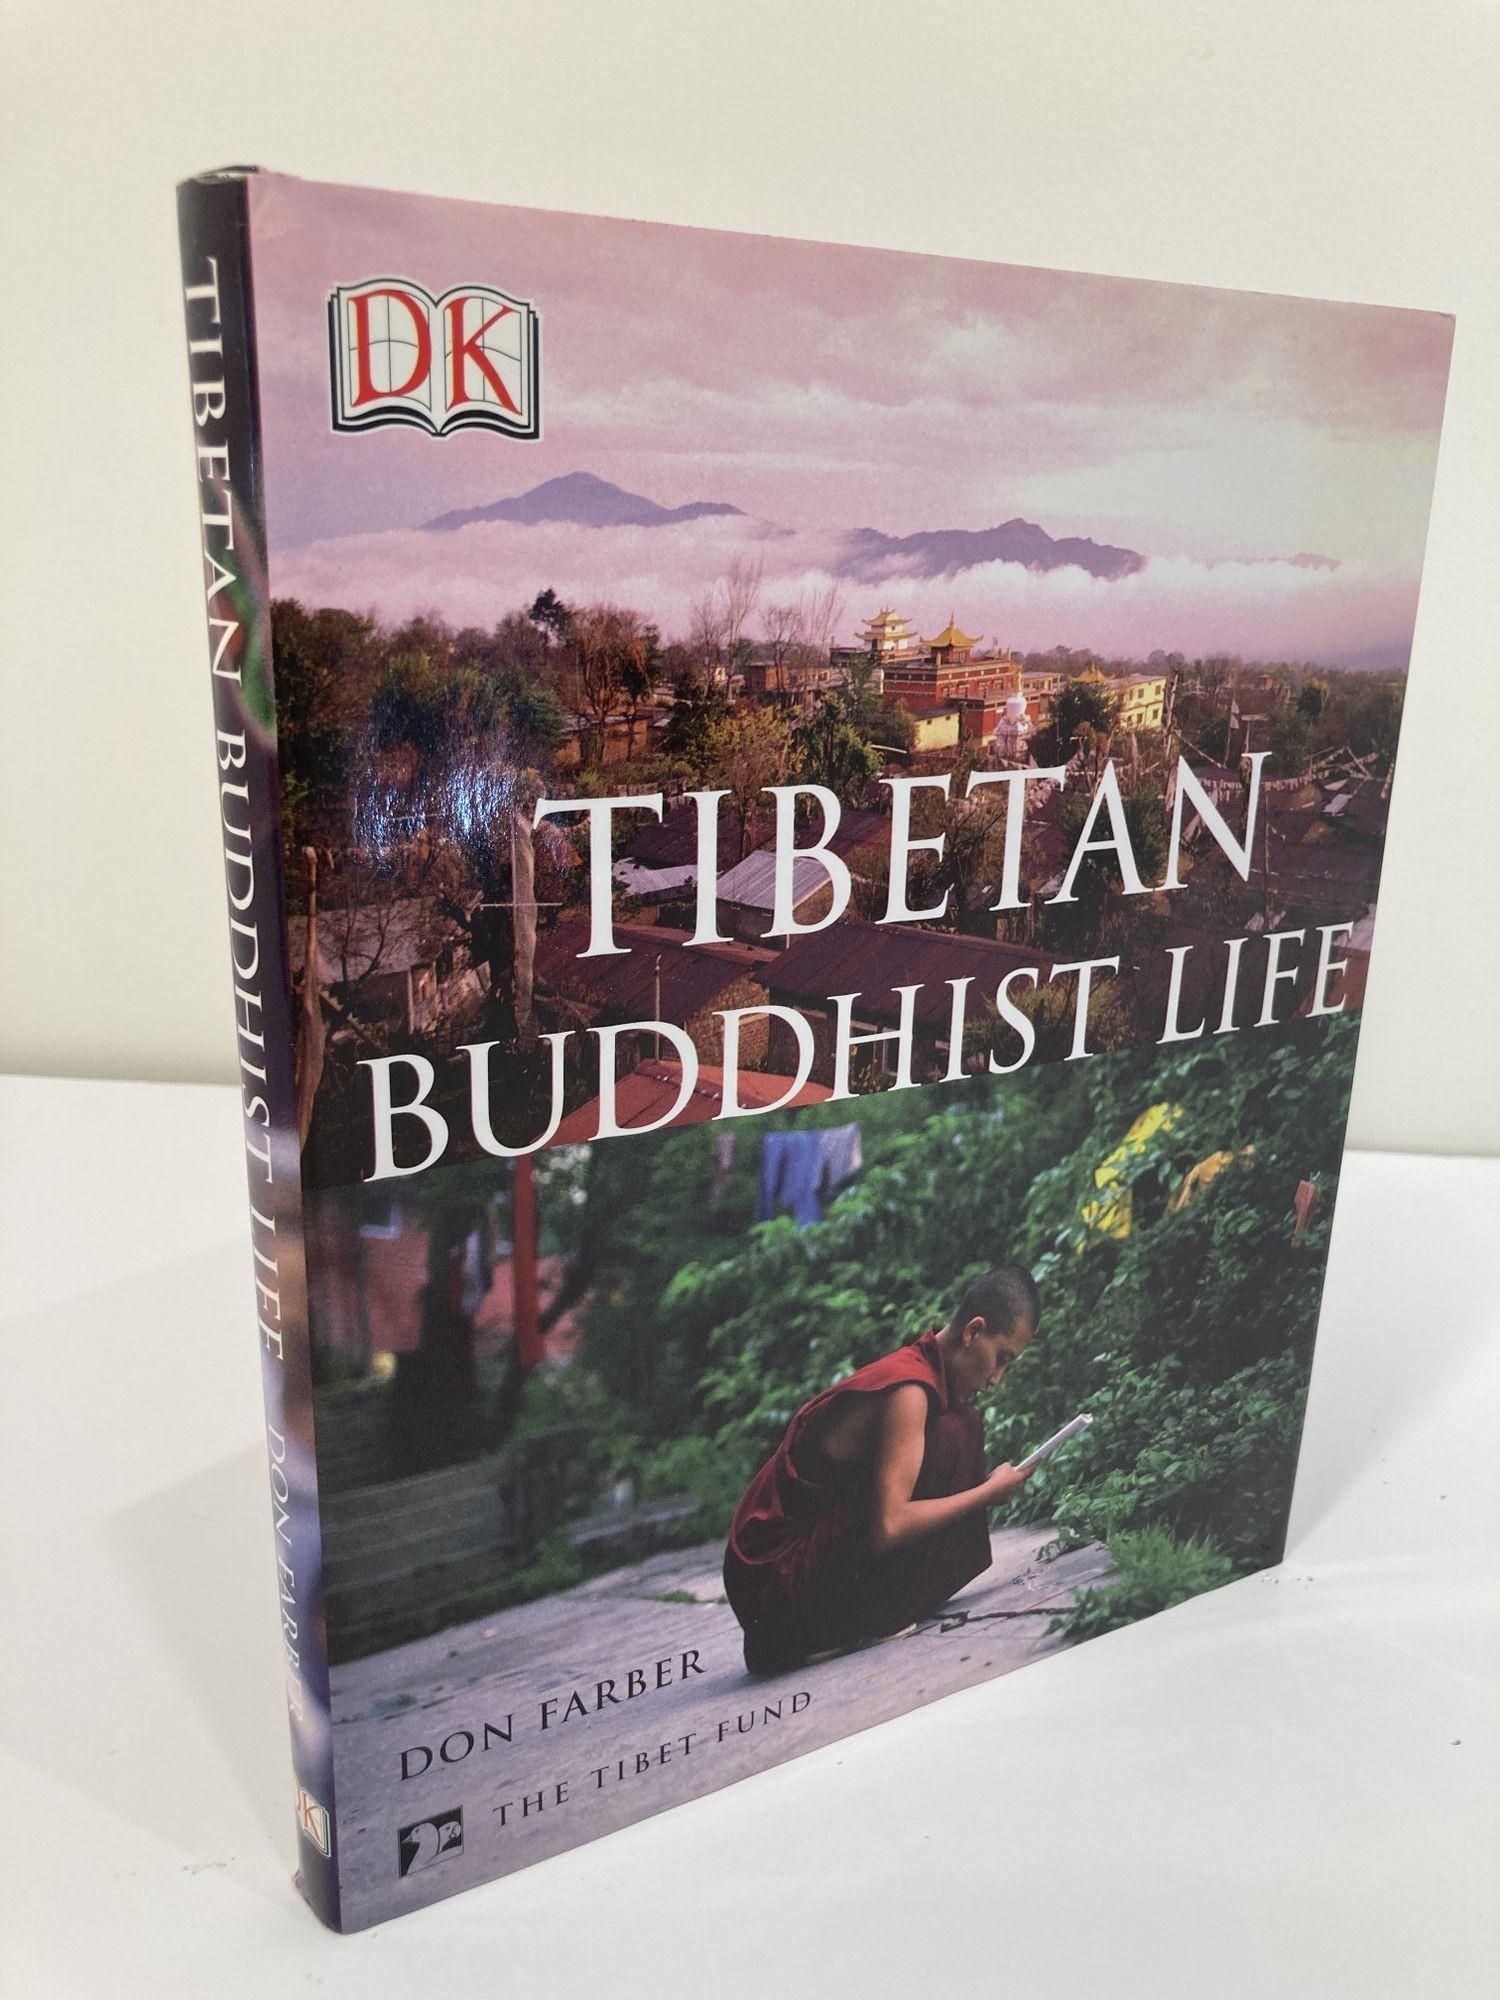 Tibetan Buddhist Life by Don Farber Hardcover Book.
Don Farber, Dorling Kindersley, 2003 - Buddhism - 192 pages.
A richly illustrated overview of Tibetan Buddhism traces the origins and history of Buddhism in Tibet, its influence on Tibetan